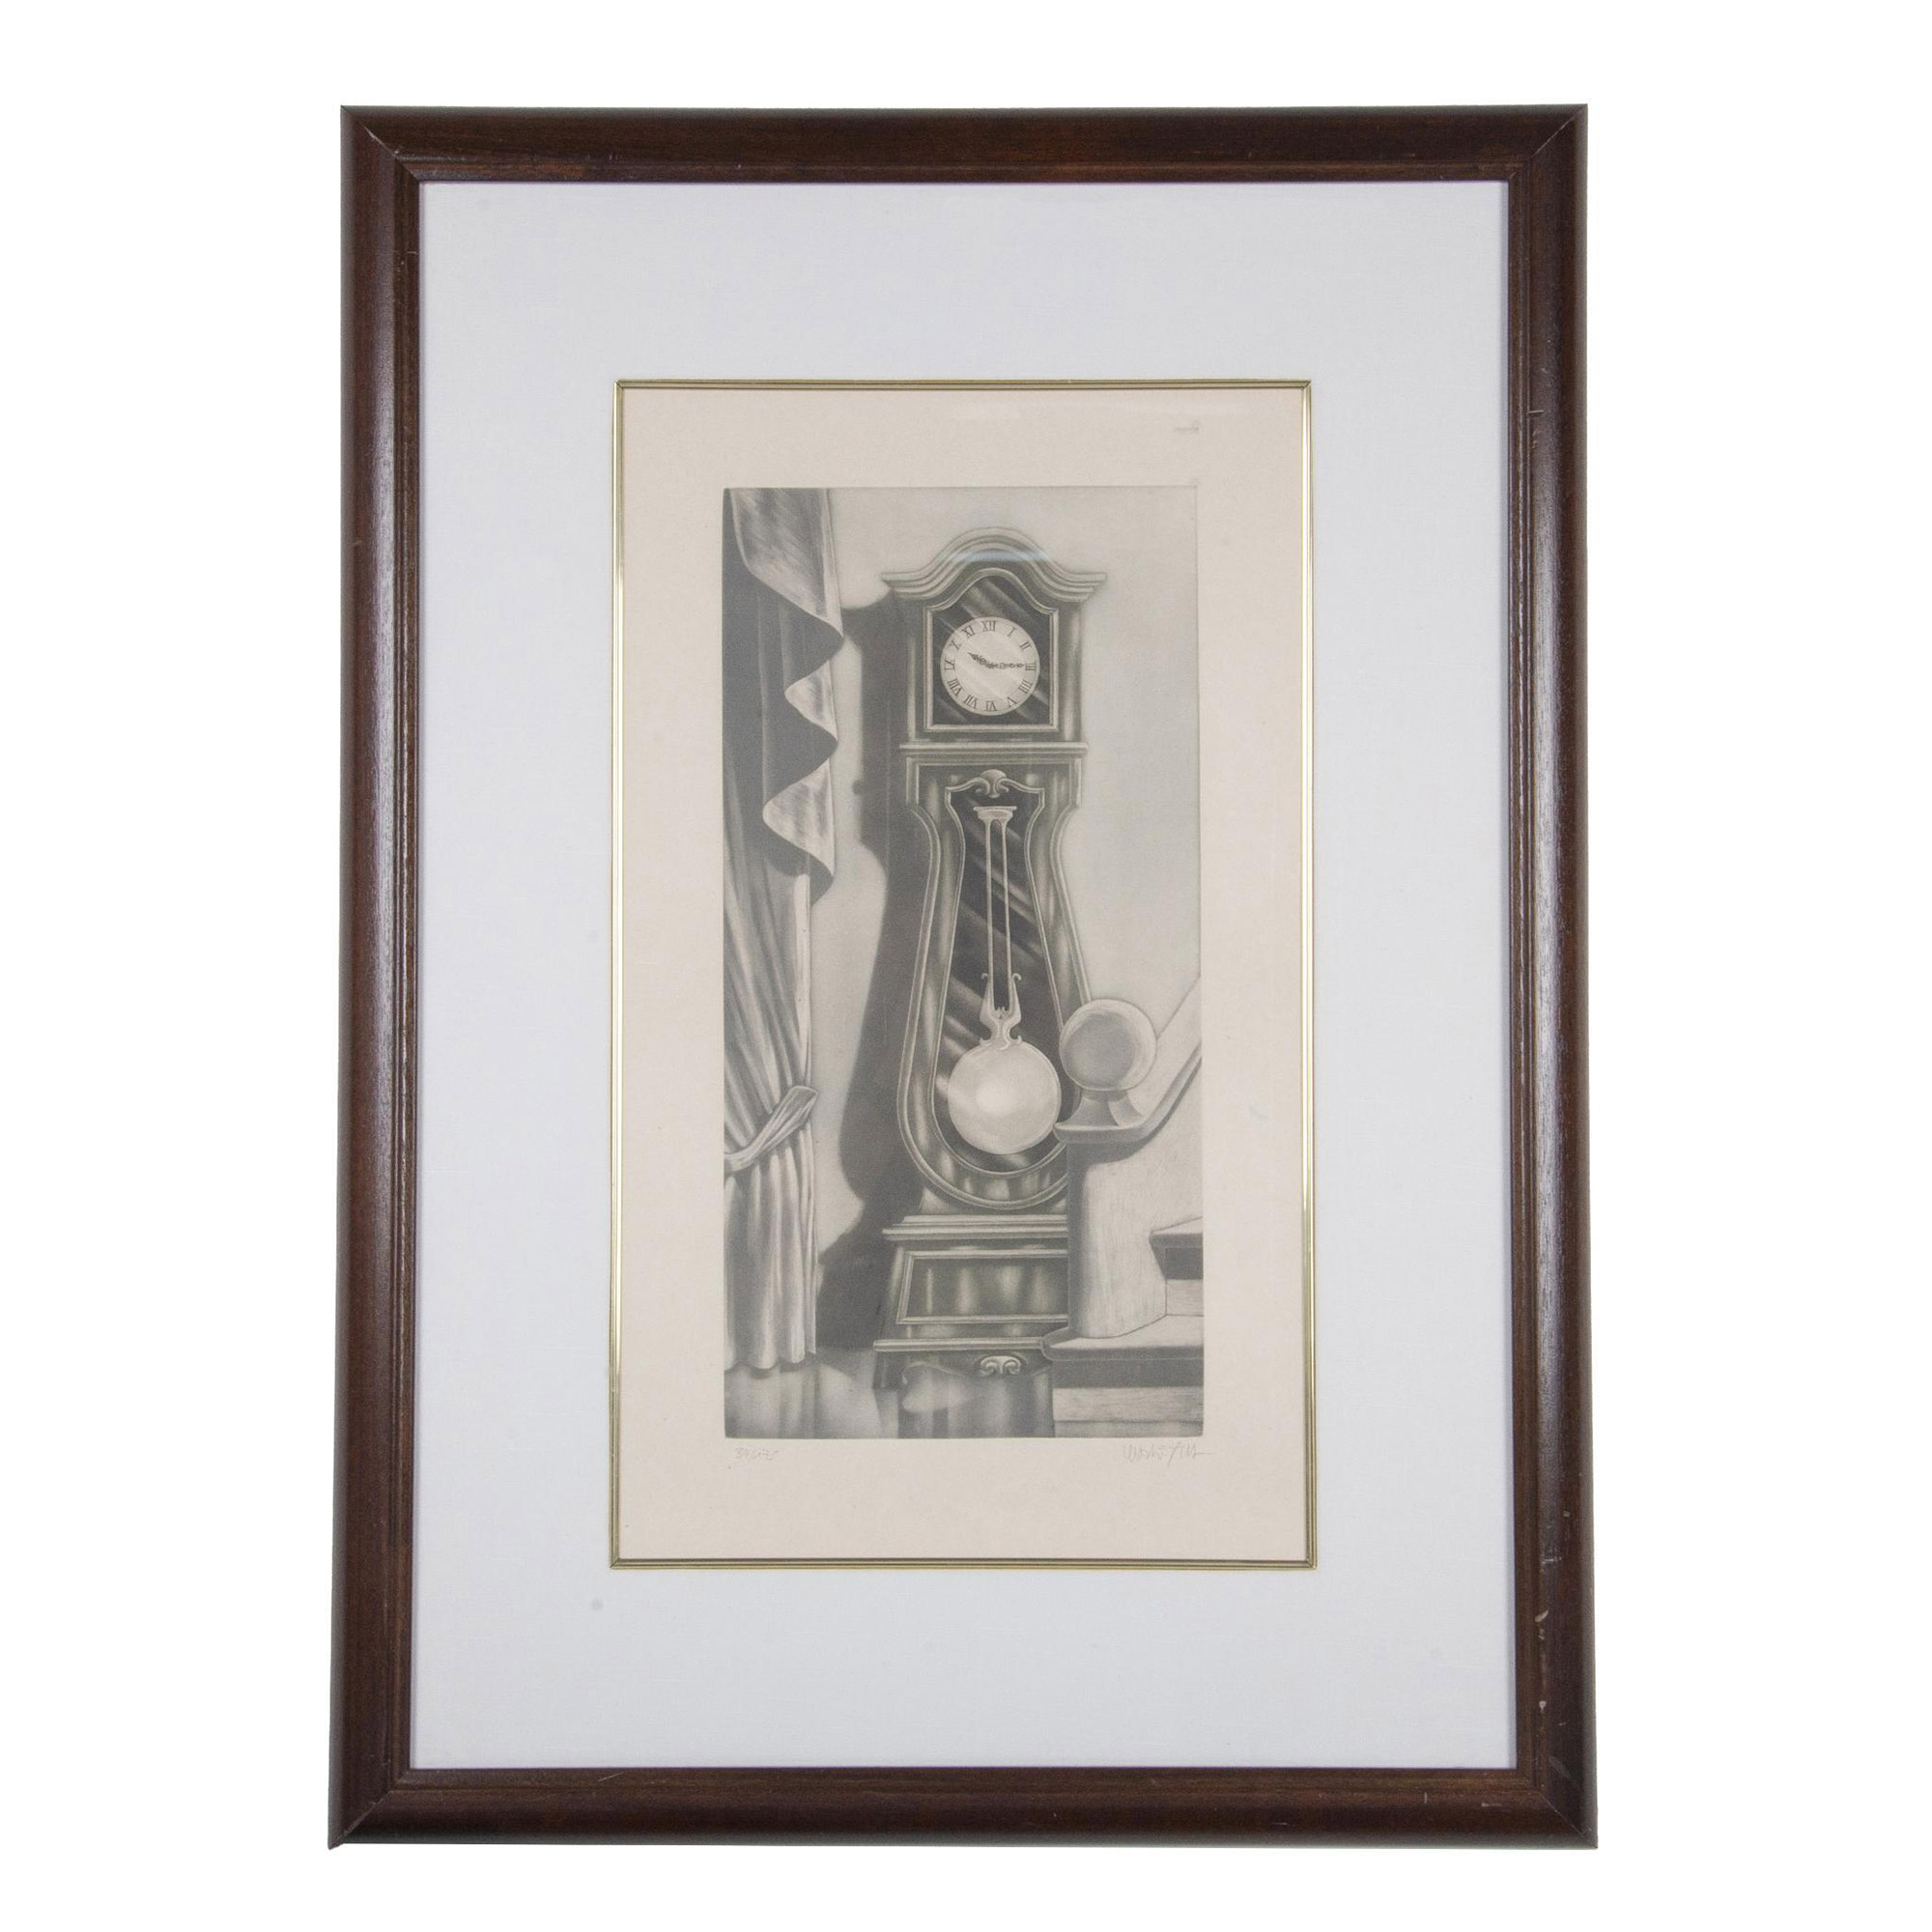 Nutting (Attr.) Original B&W Engraving on Paper, Signed